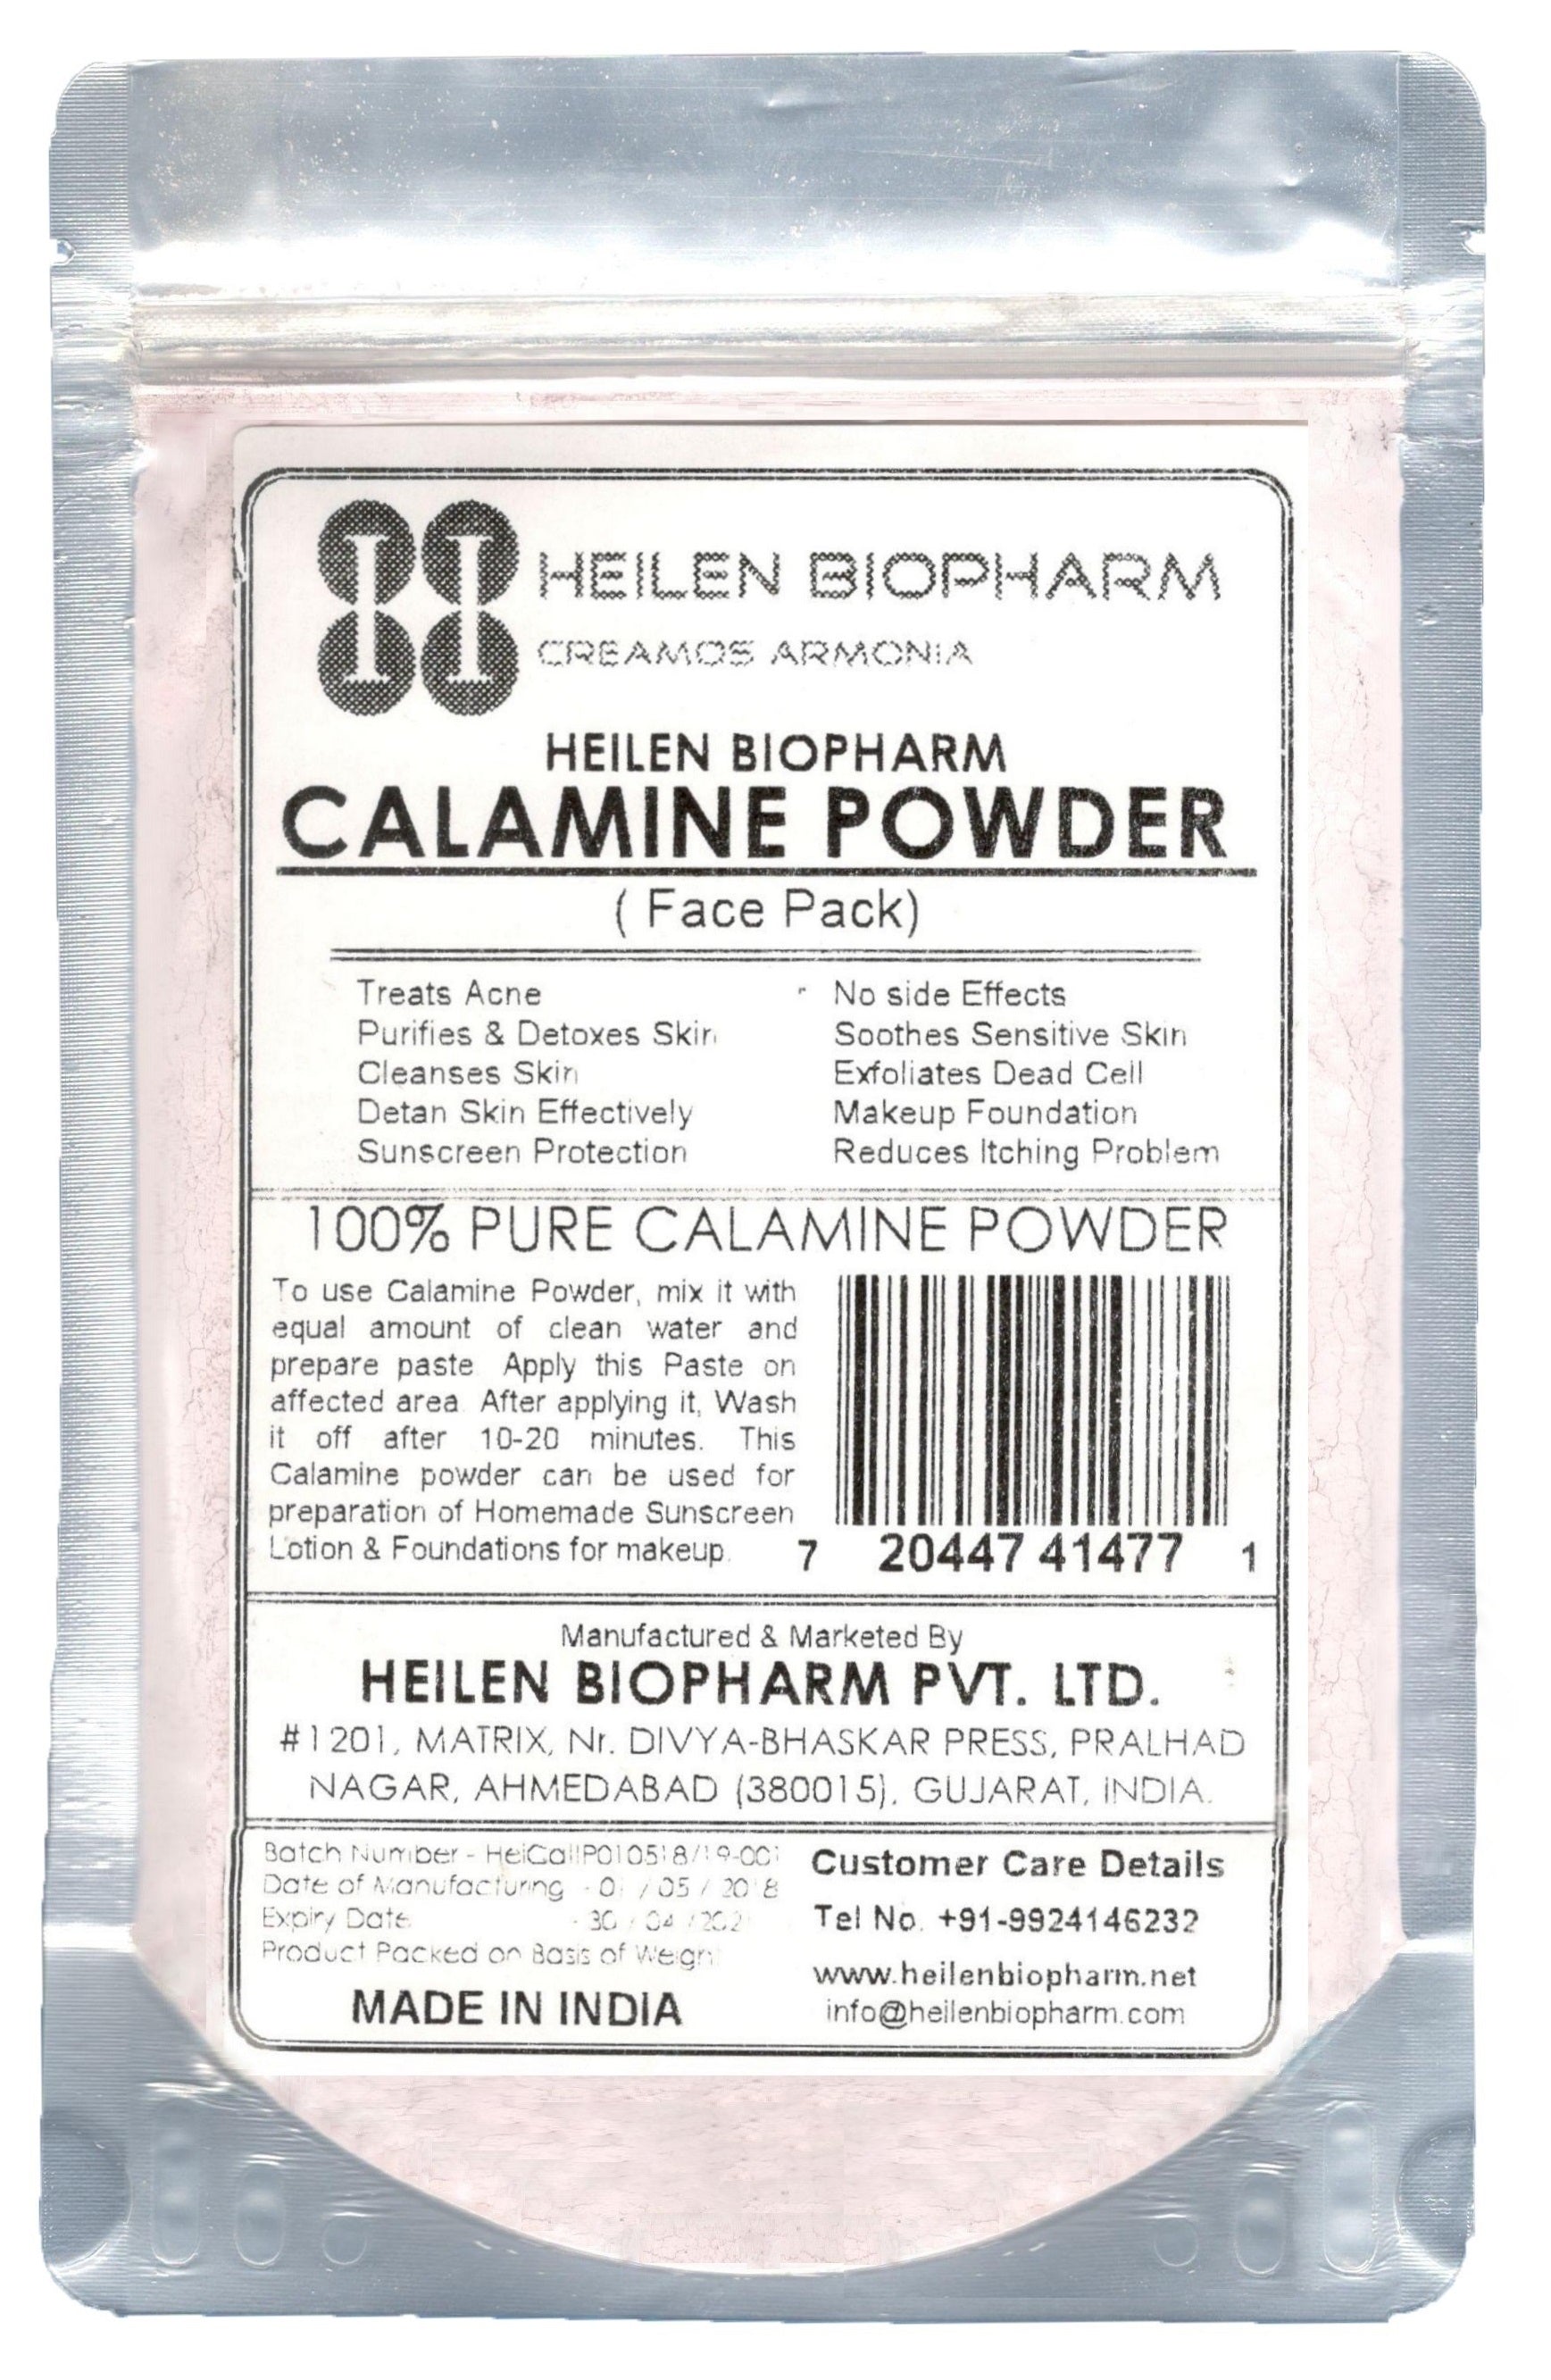 All Benefits of Calamine Powder in 3 Best options